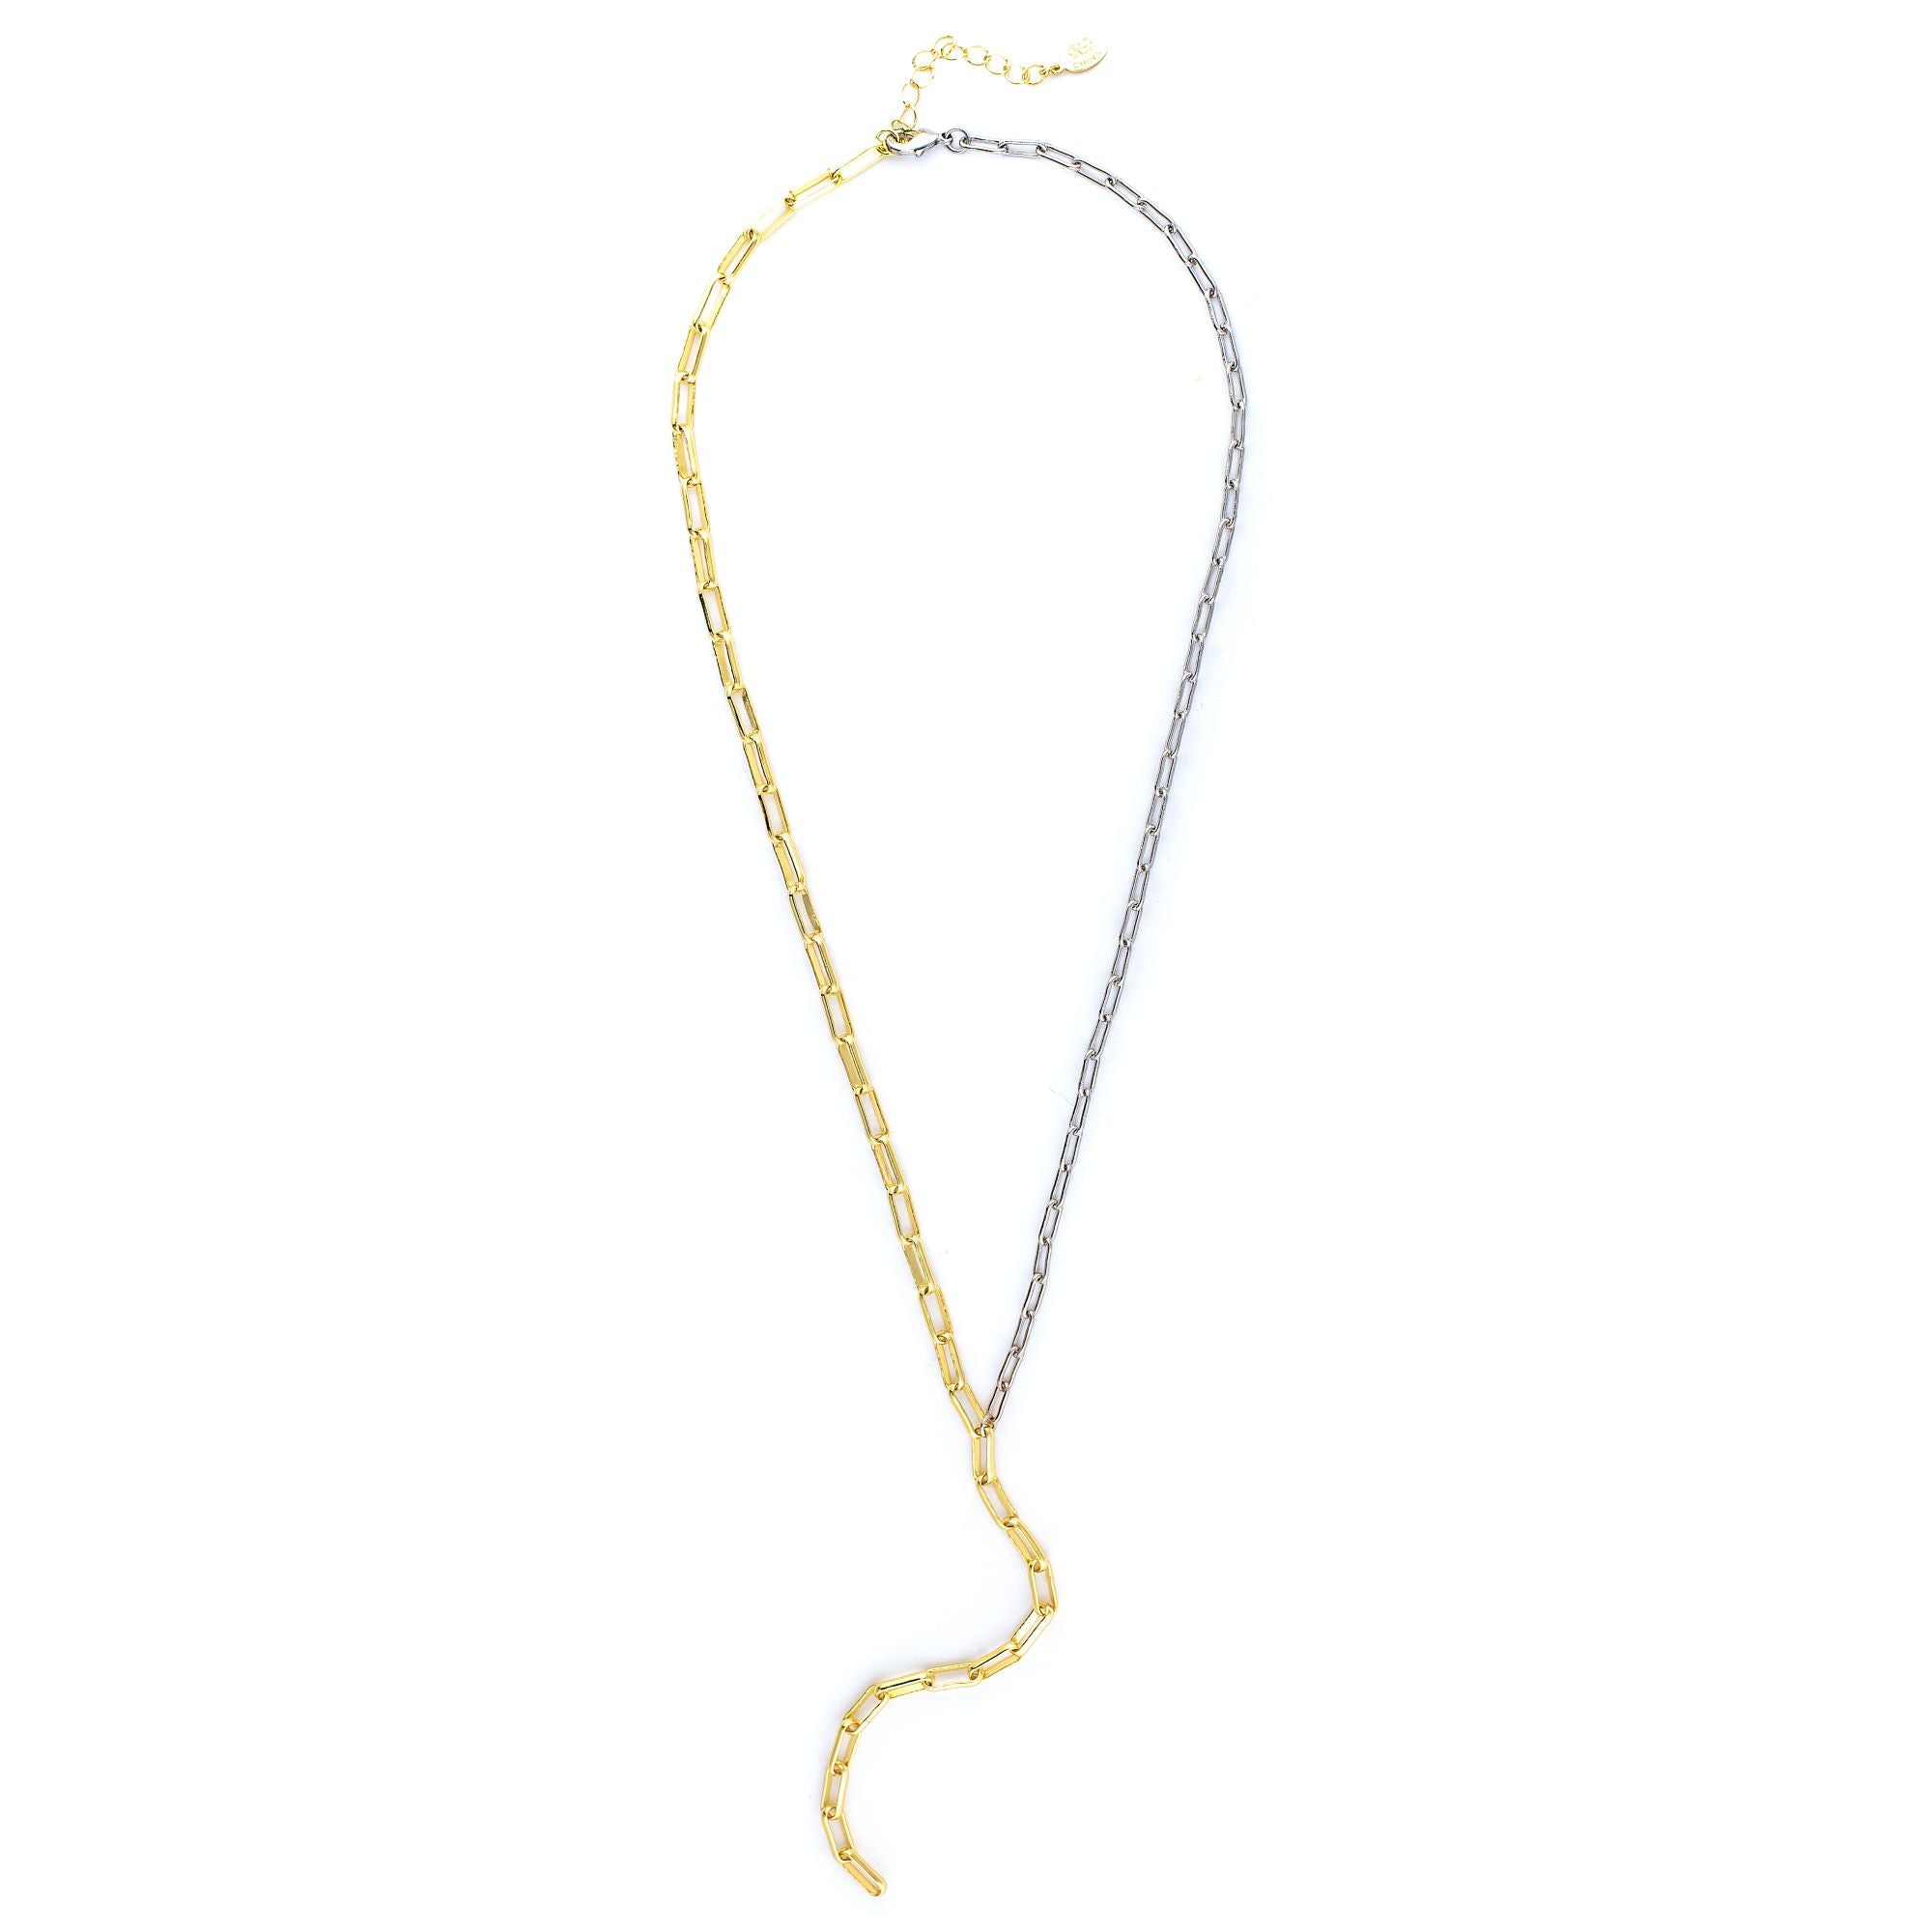 30 Inch Adjustable Paperclip Lariat Necklace with Three Pave Dangle Ends in  Yellow Gold | New York Jewelers Chicago